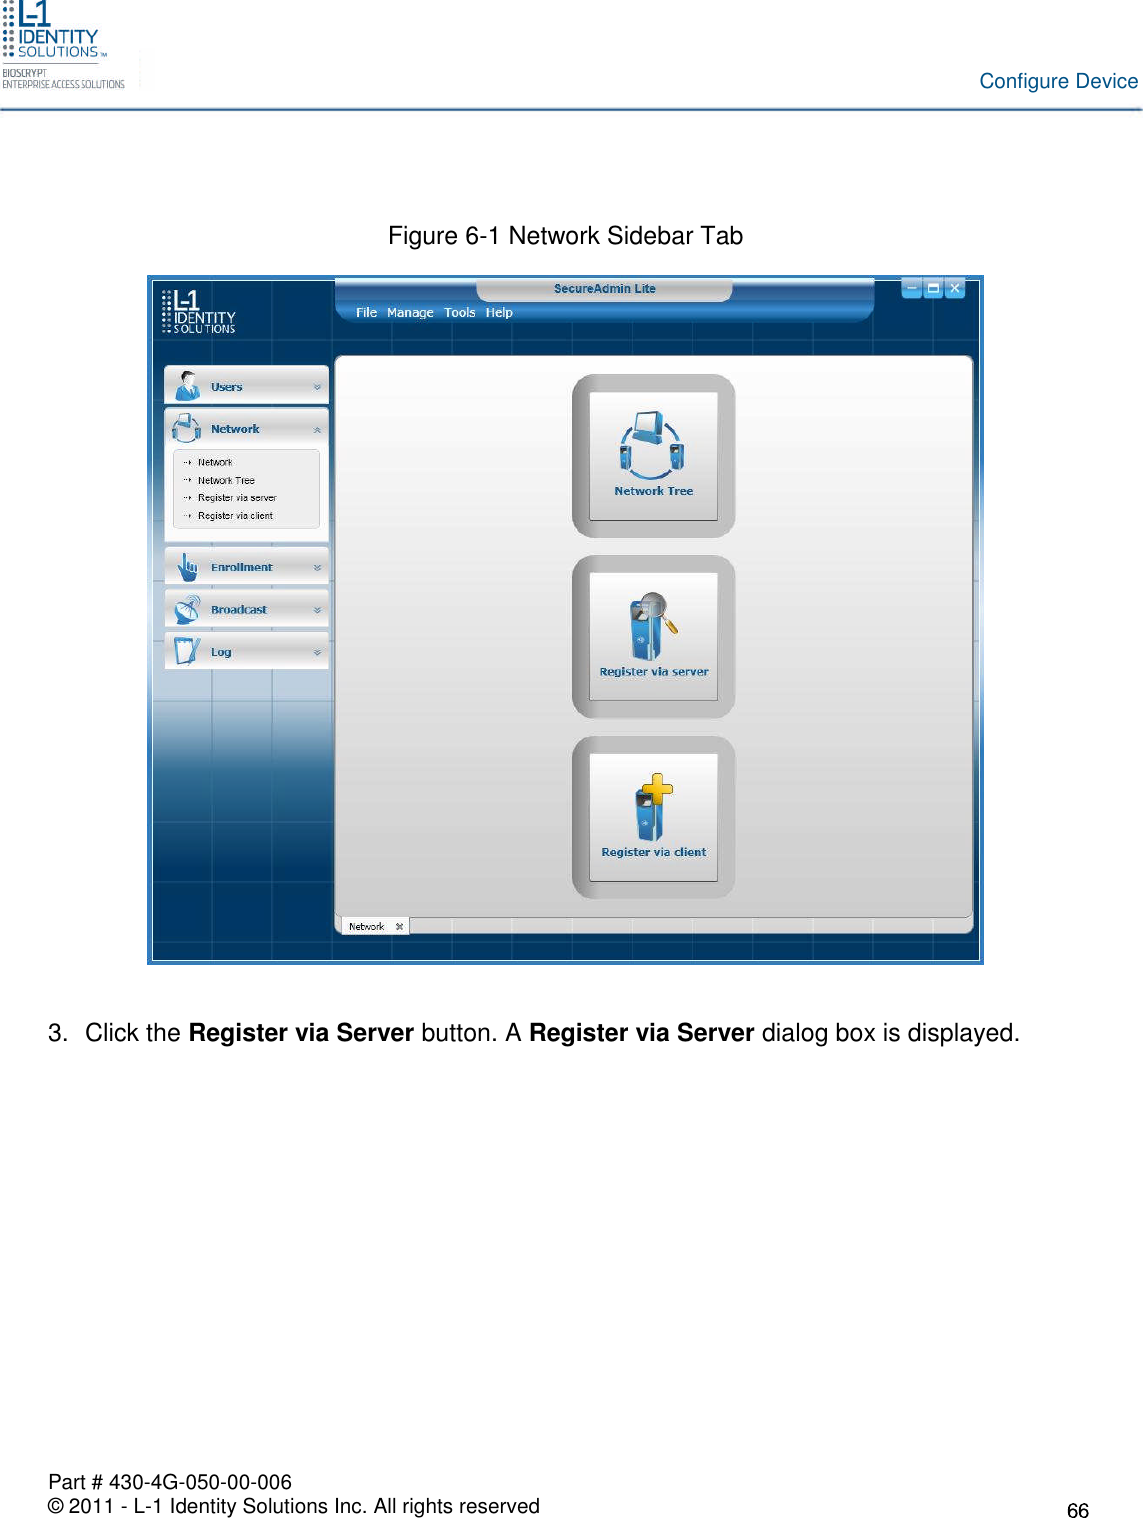 Part # 430-4G-050-00-006© 2011 - L-1 Identity Solutions Inc. All rights reservedConfigure DeviceFigure 6-1 Network Sidebar Tab3. Click the Register via Server button. A Register via Server dialog box is displayed.